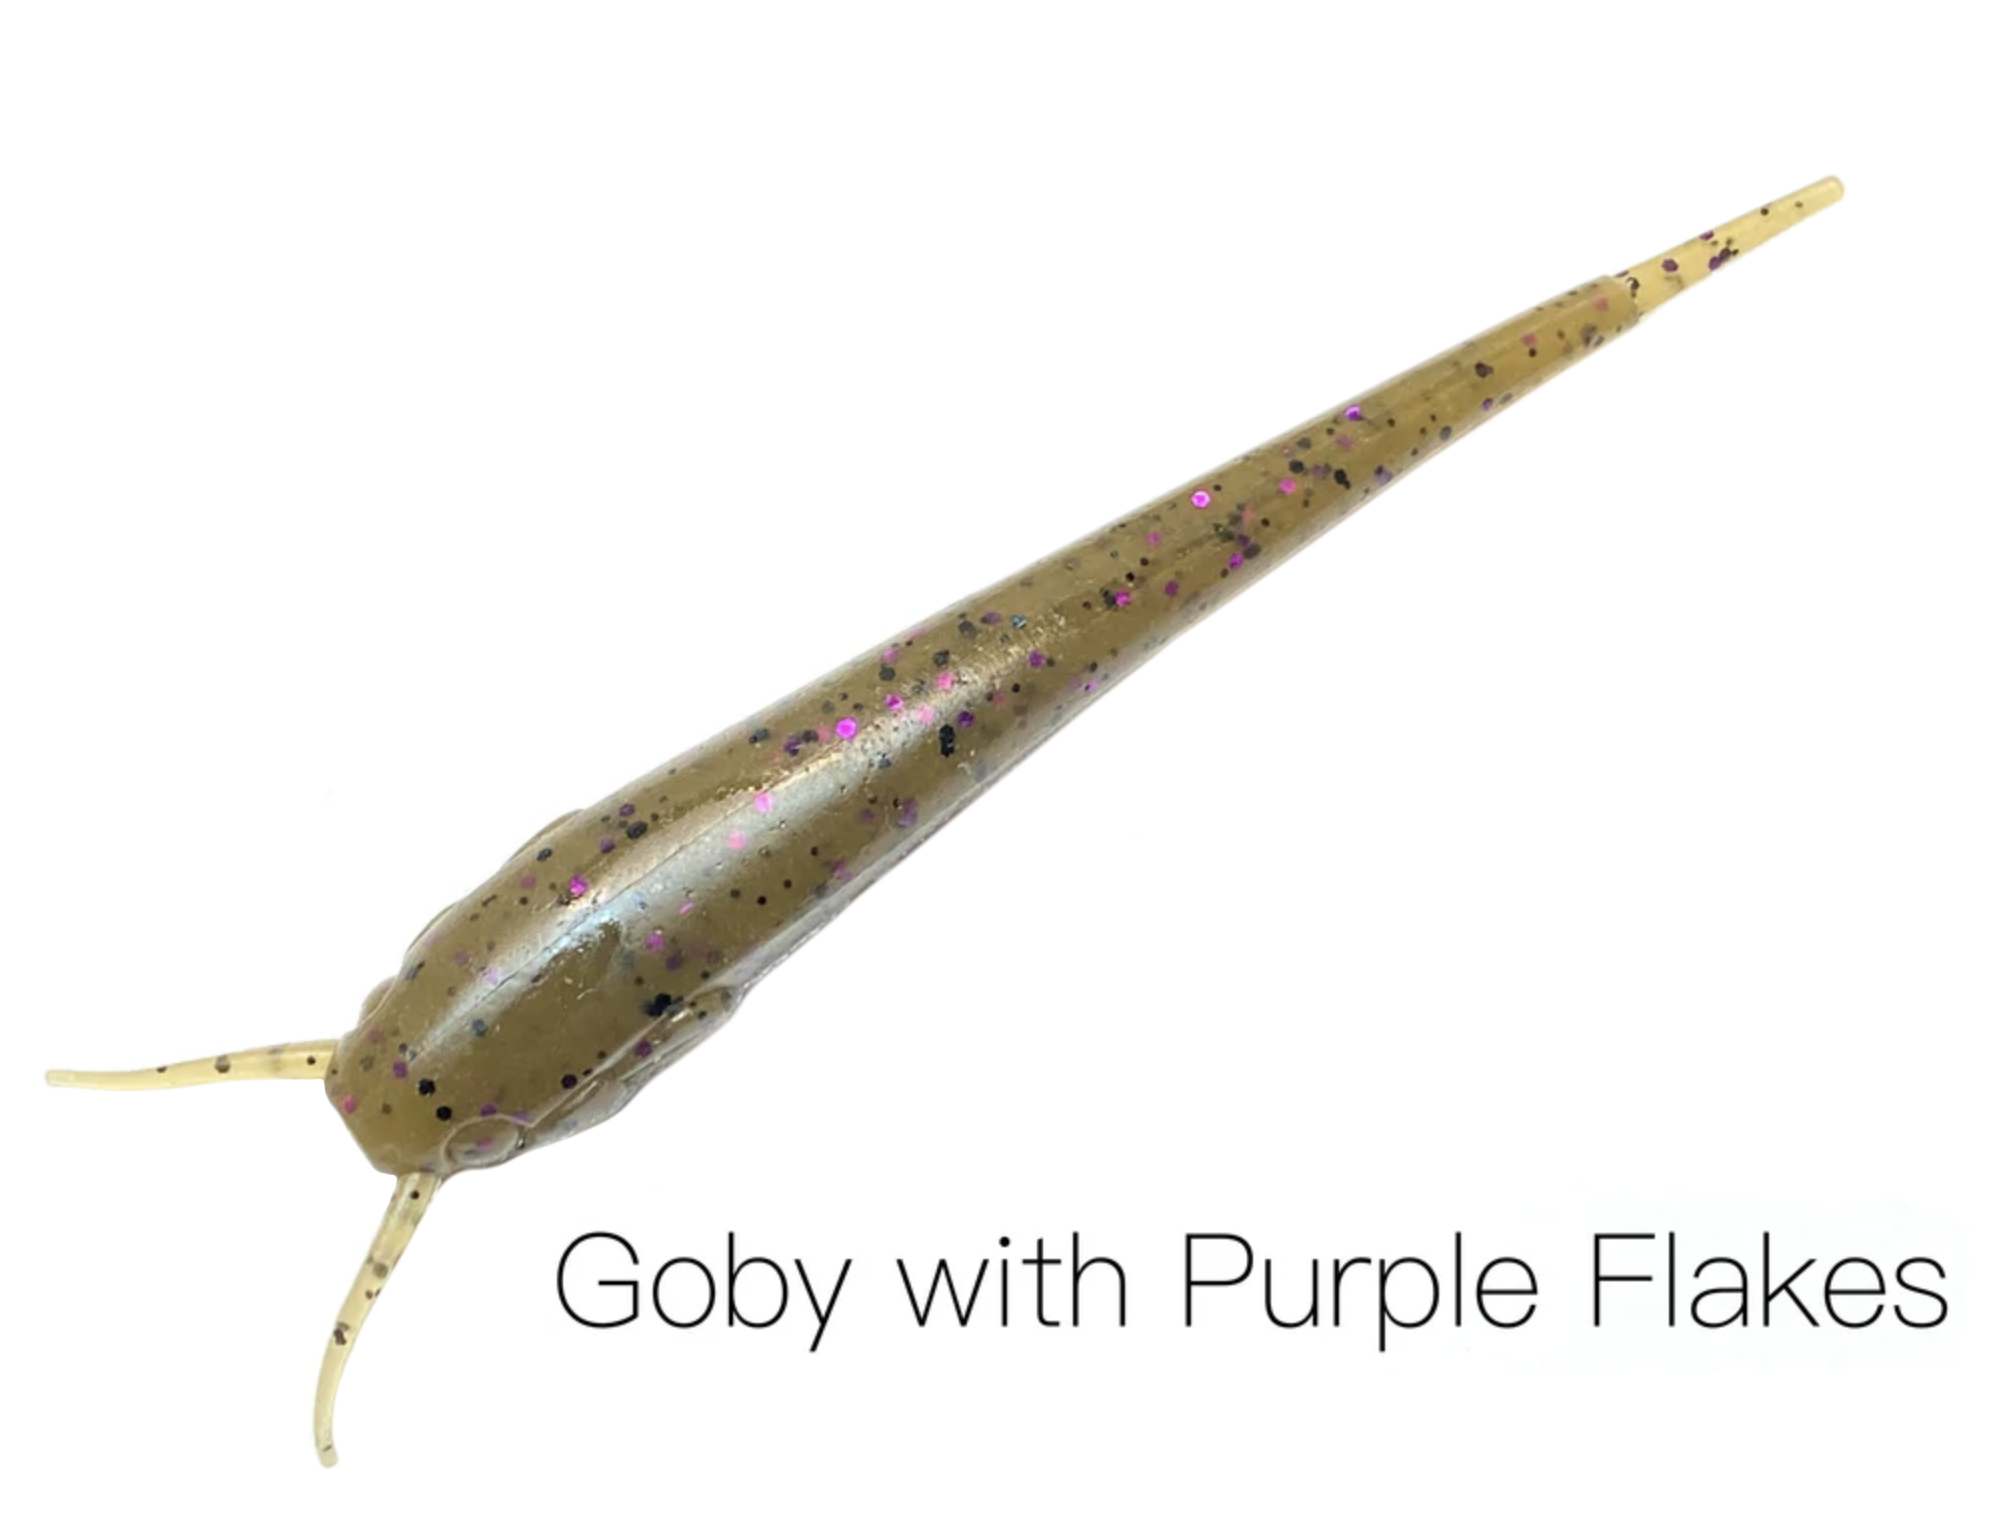 Goby with Purple Flakes